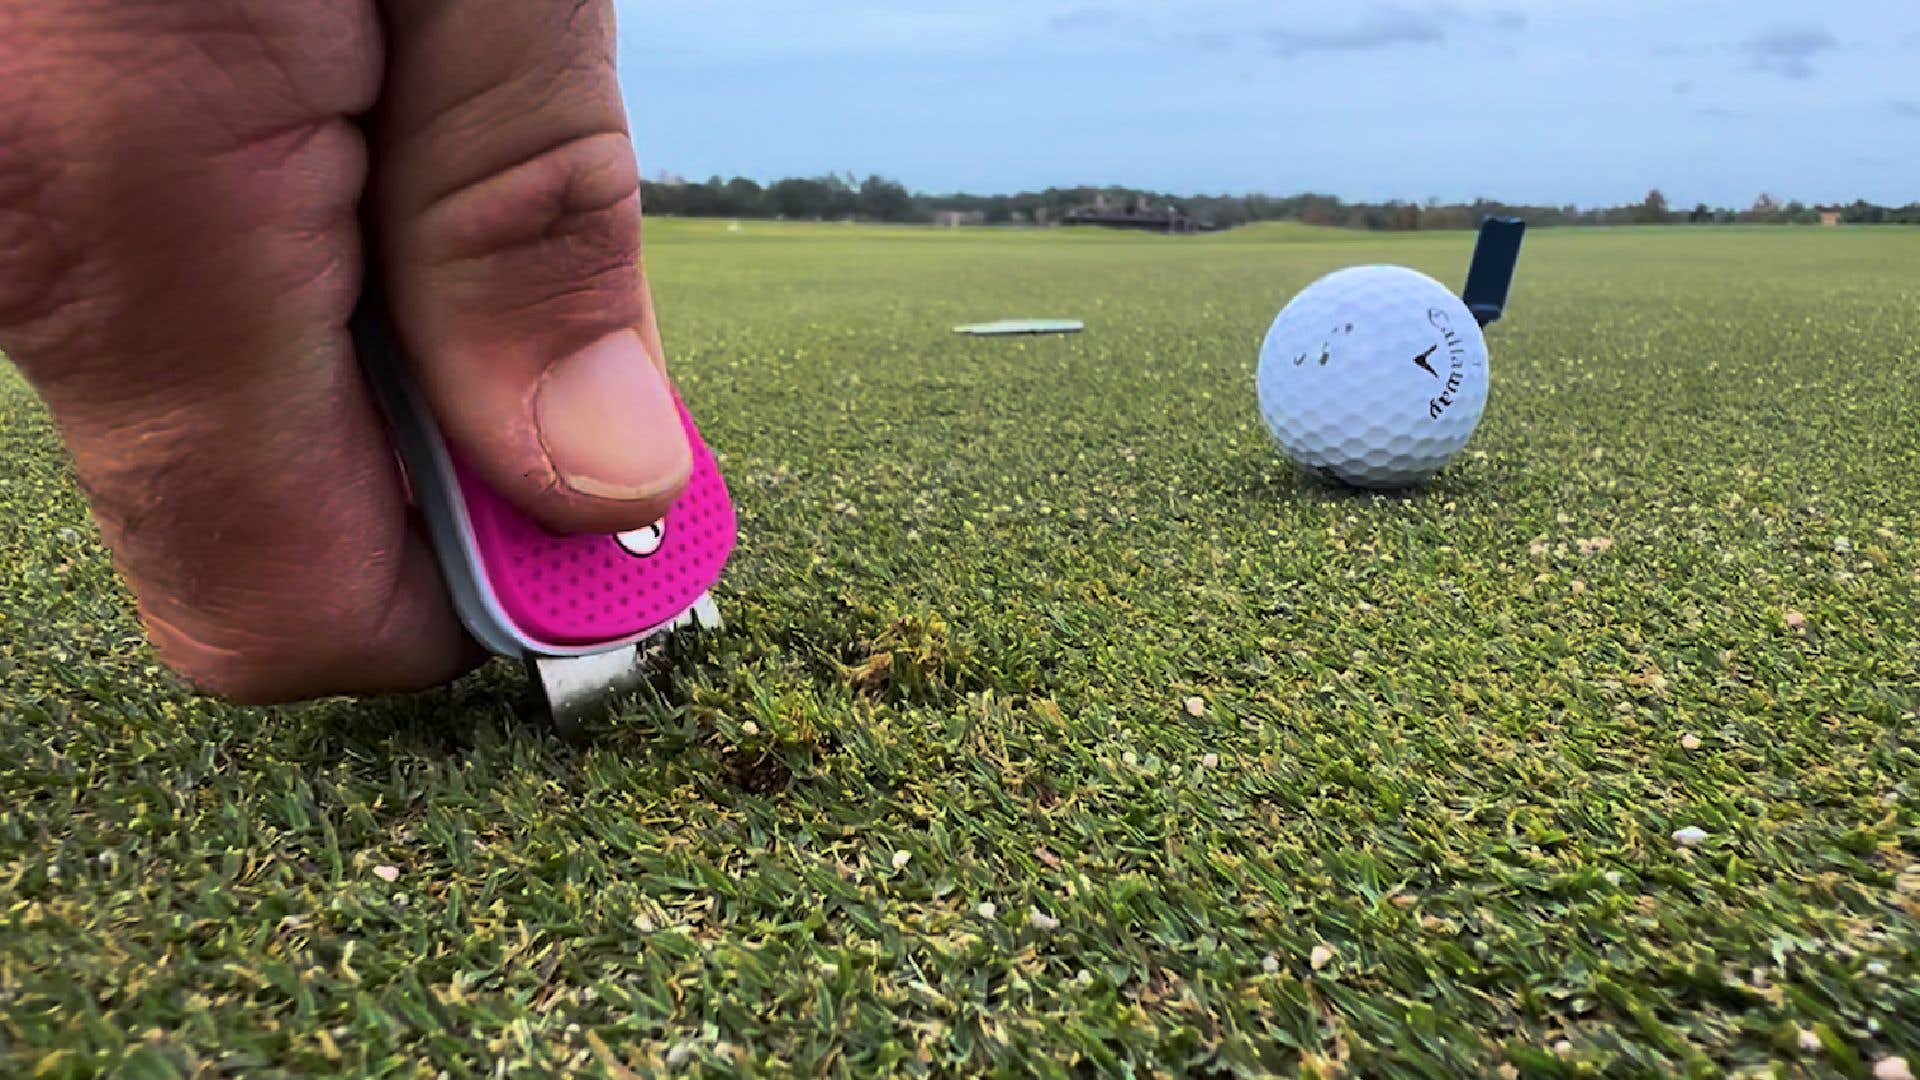 Repairing your ball marks the right way | Super Secrets